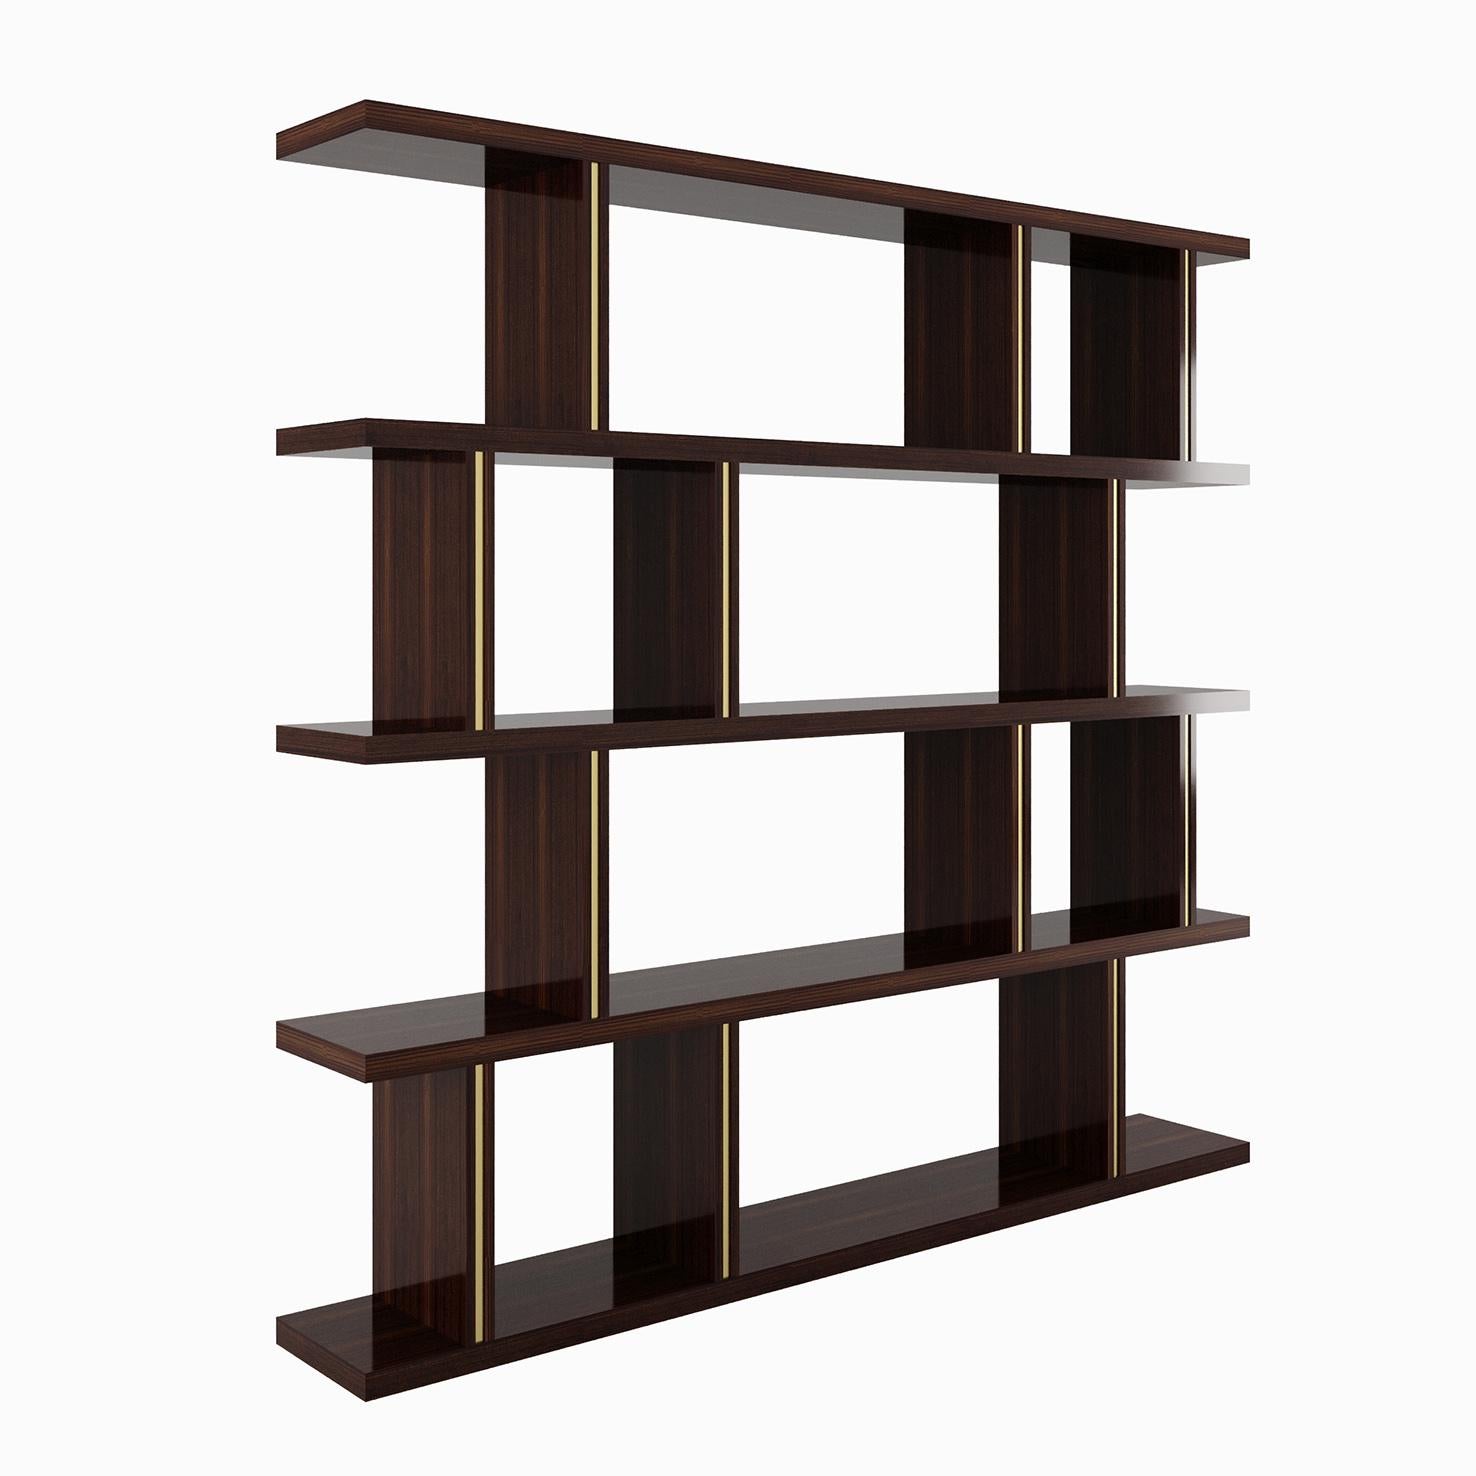 NOBRE Bookcase in Glossy Ebony Makassar and Antique Brass Trims In New Condition For Sale In Frazão, Porto